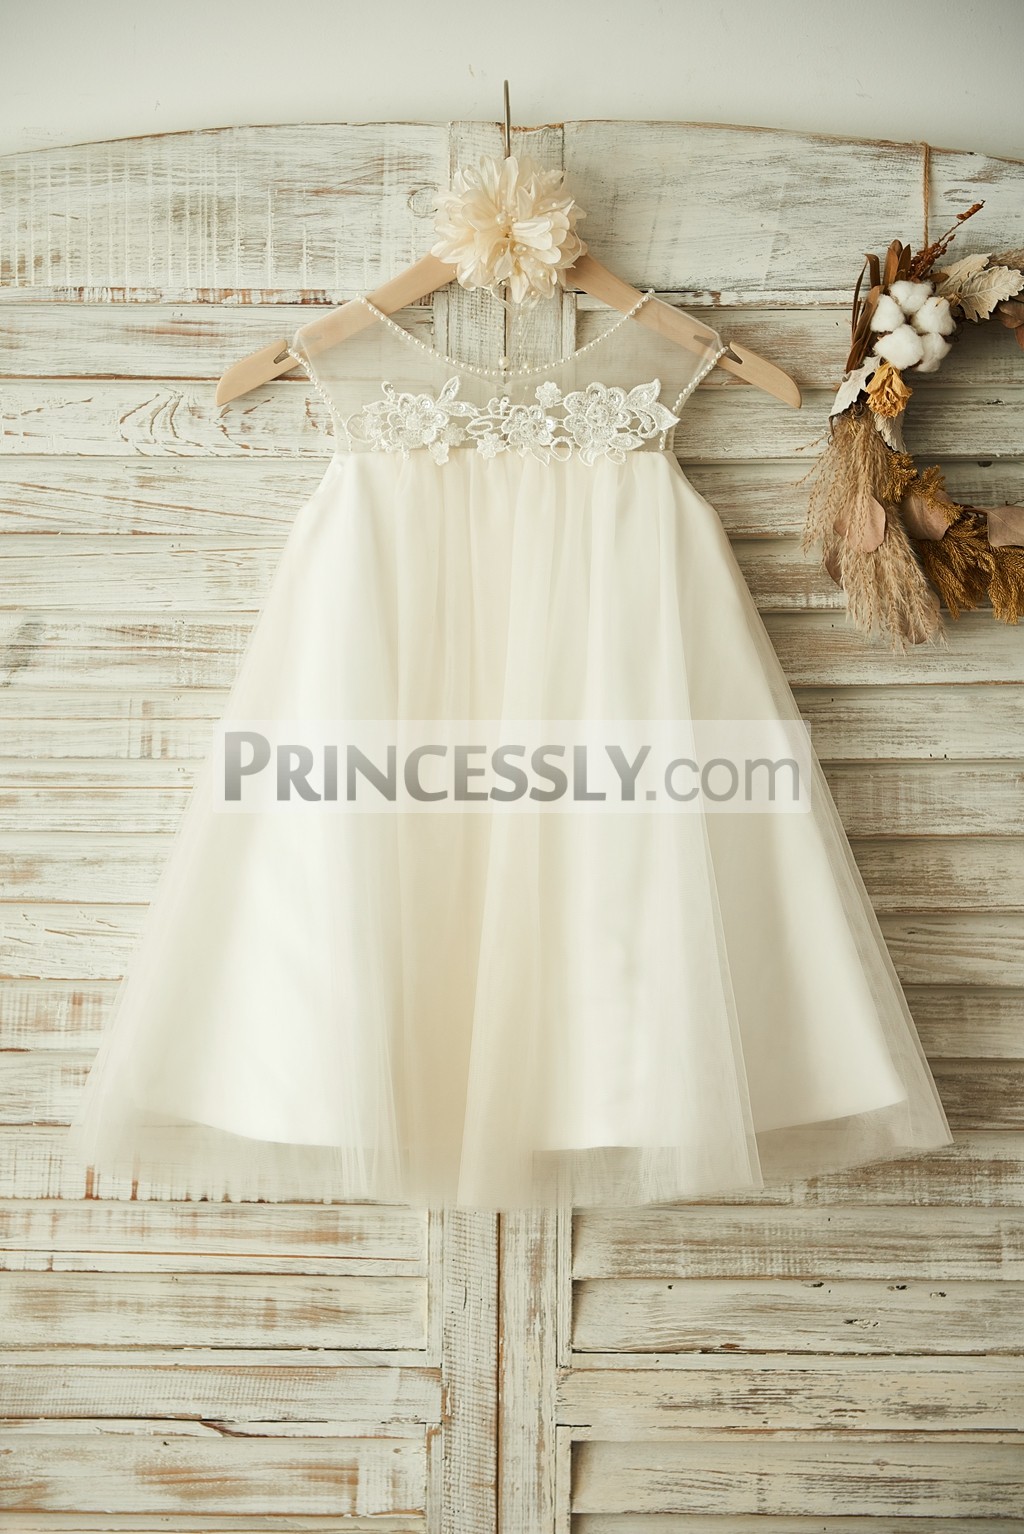 Sheer Neck Ivory Tulle A-line Flower Girl Dress with Pearls & Appliques